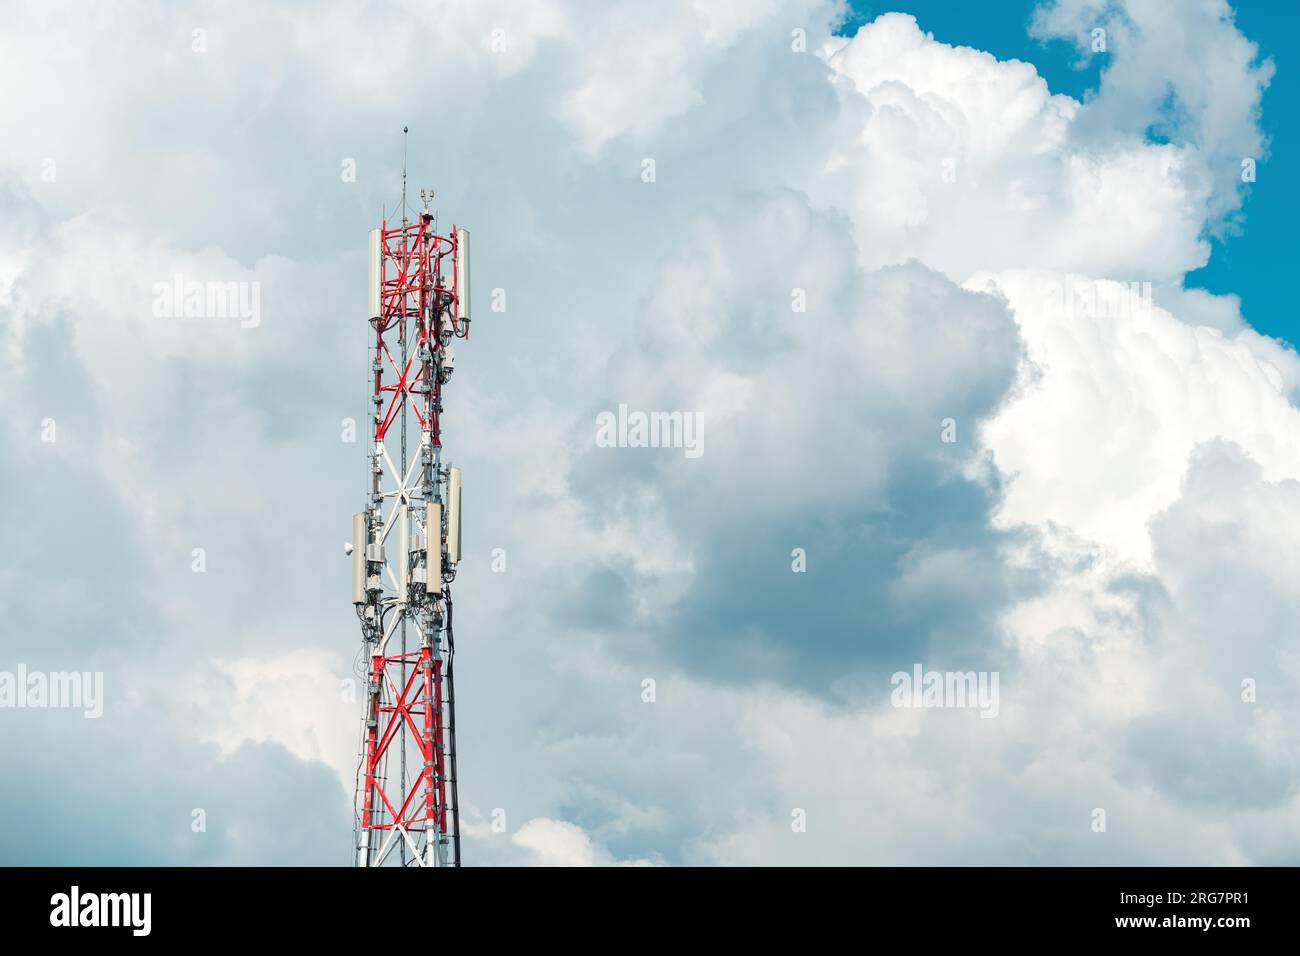 Mobile telephony base station on communication tower against cloudy summer sky Stock Photo